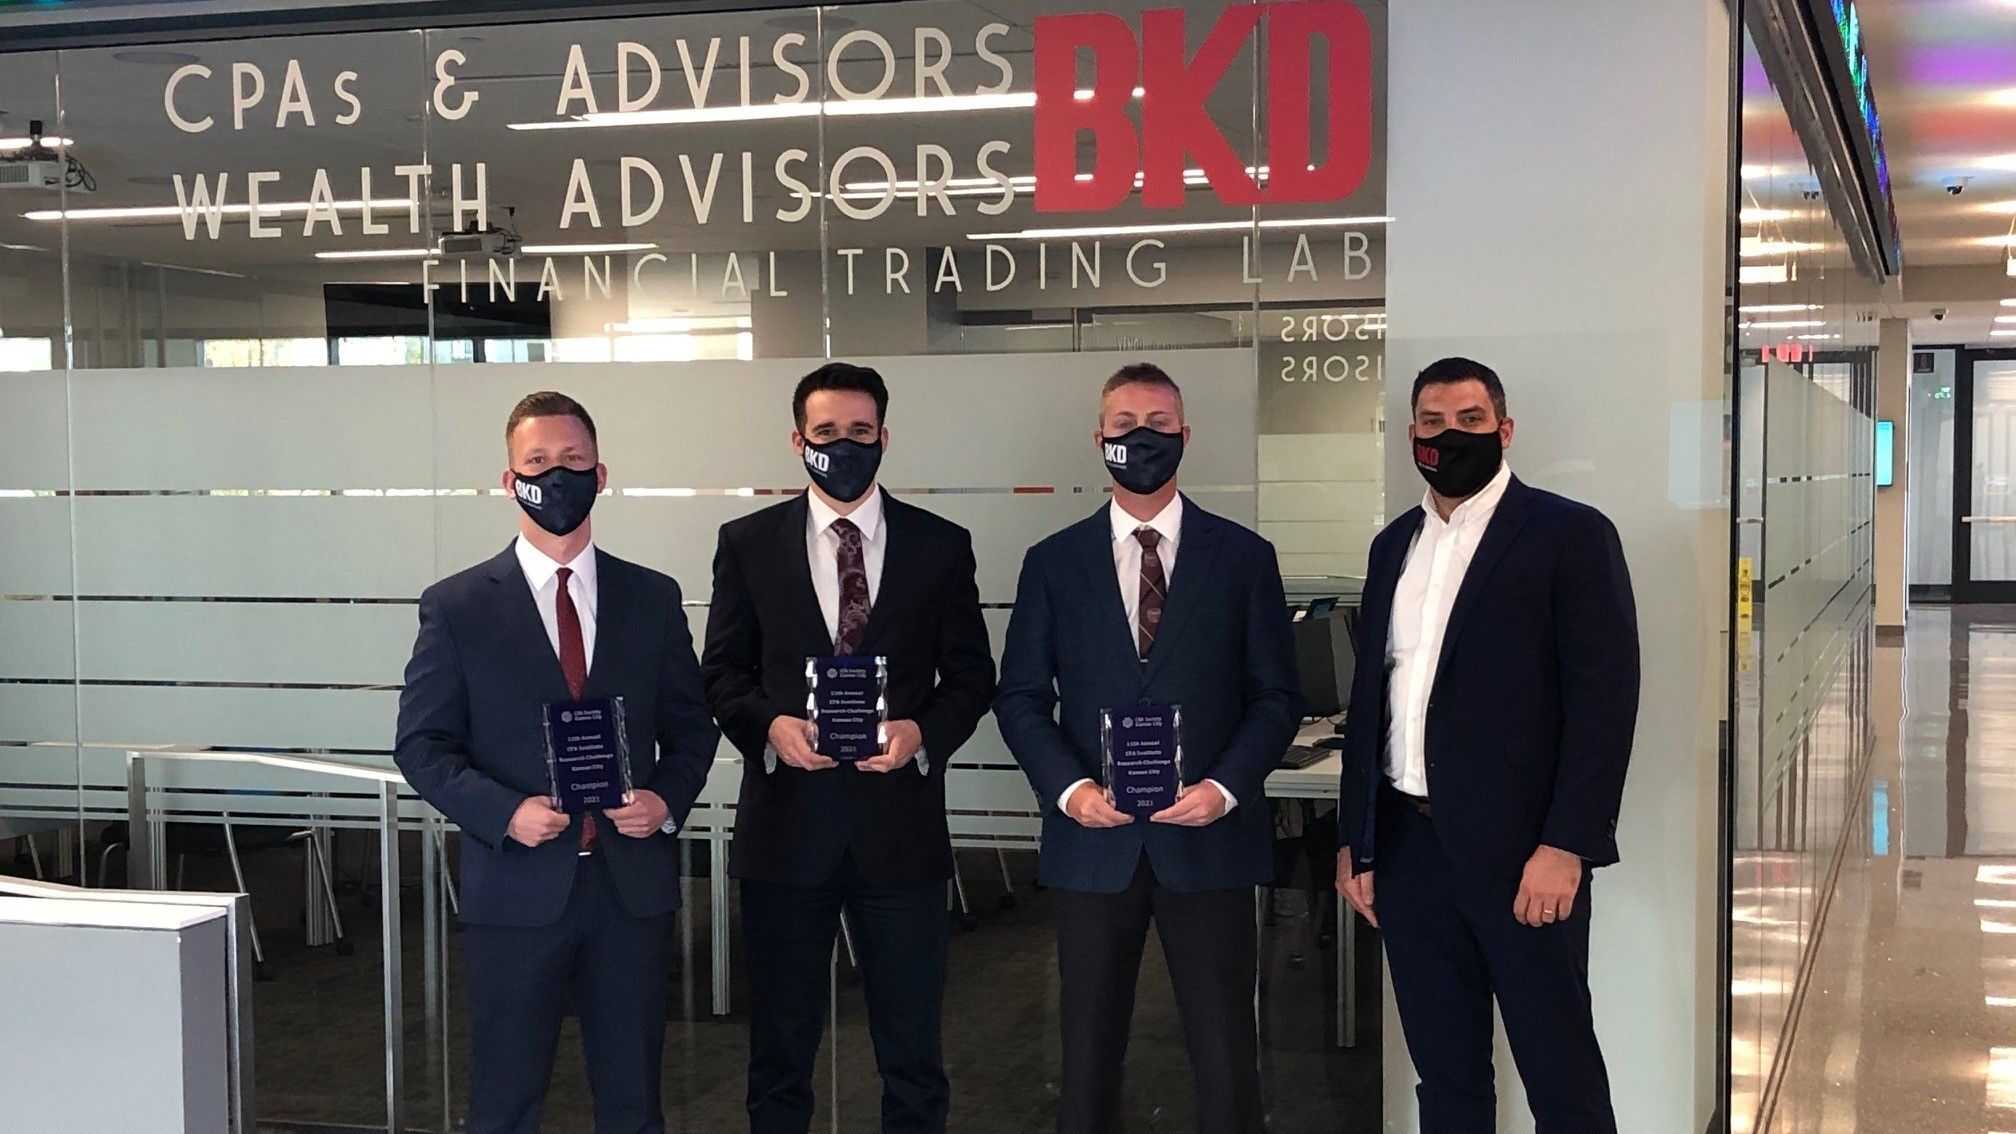 Four men with masks holding award plaques